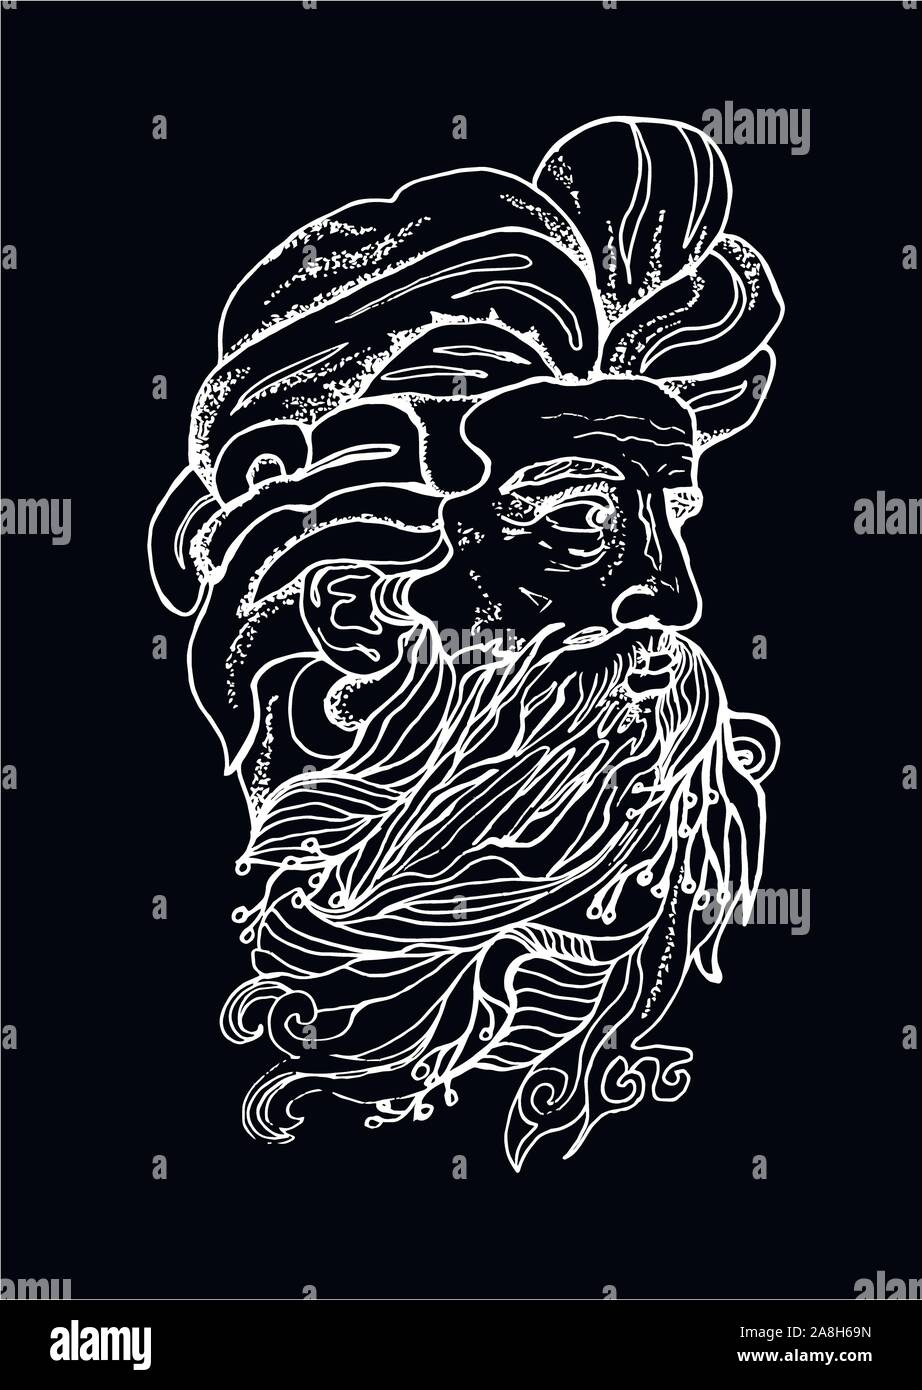 Black and white illustration of a man's head with a beard and branches. Stock Vector